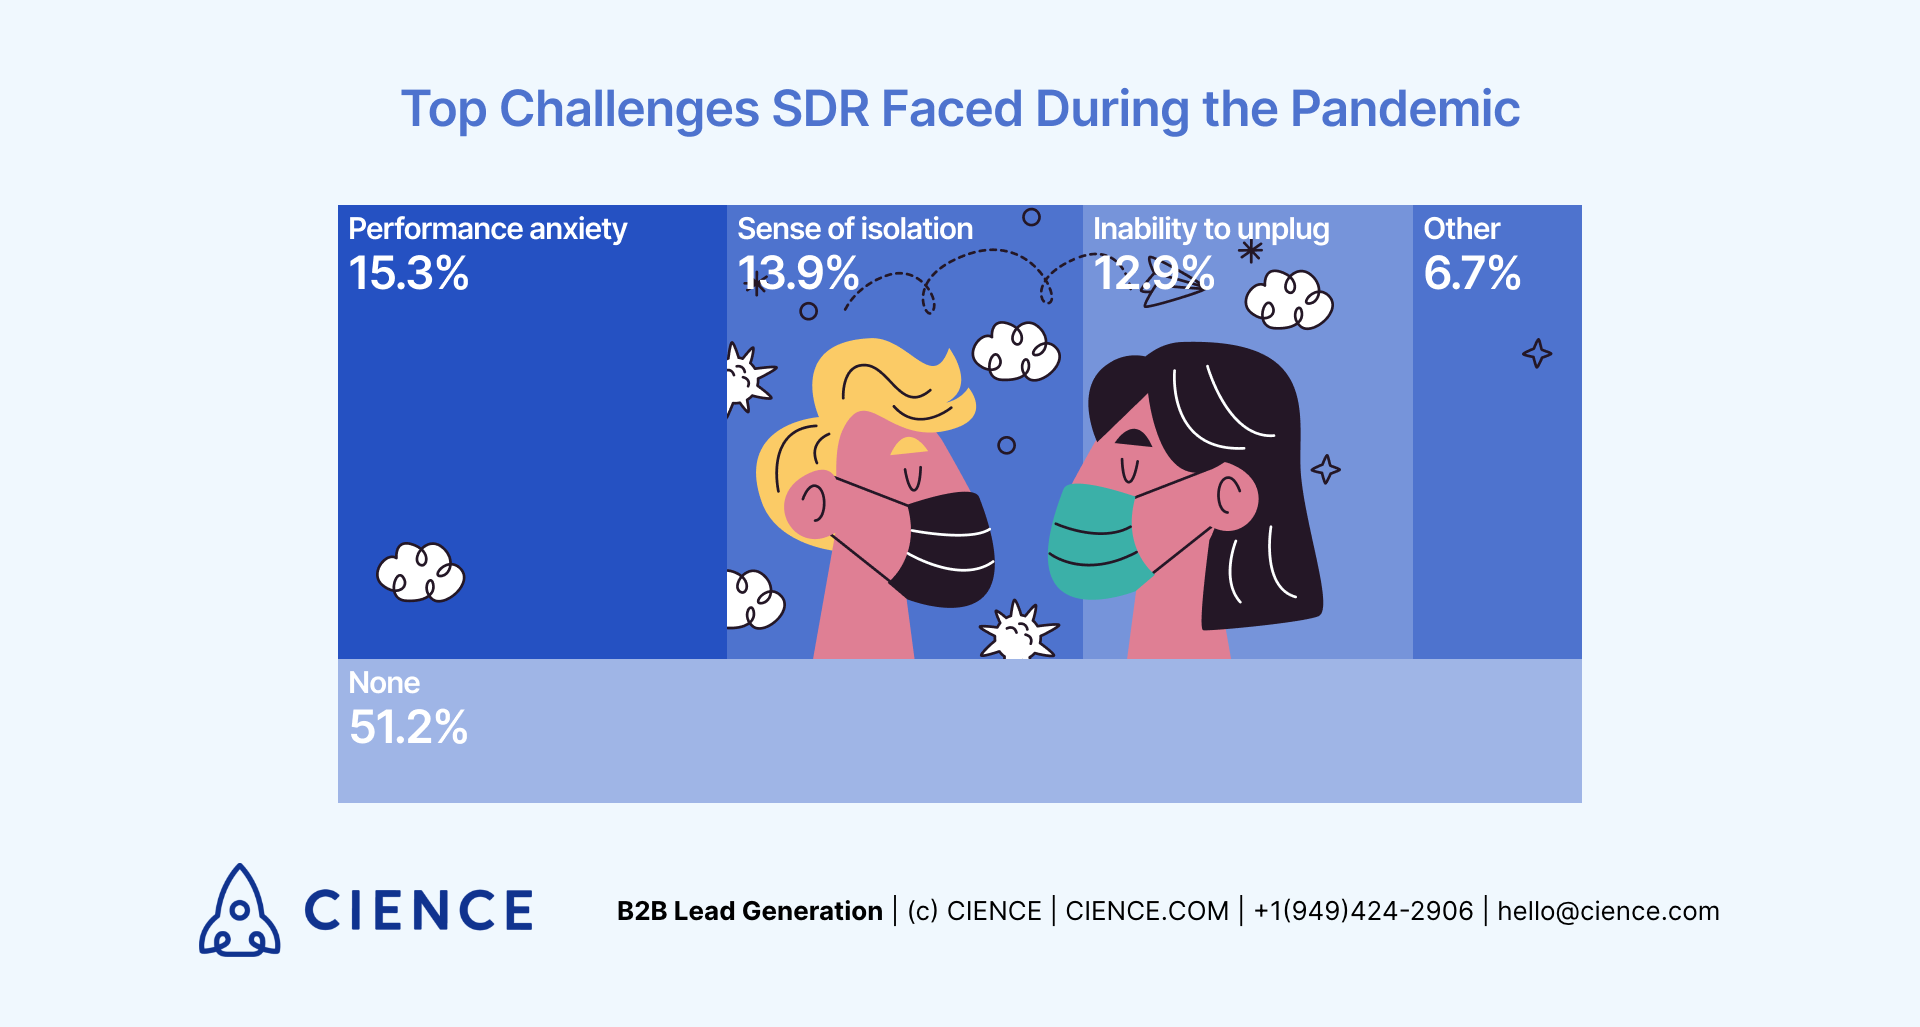 Top Challenges SDR Faced During the Pandemic